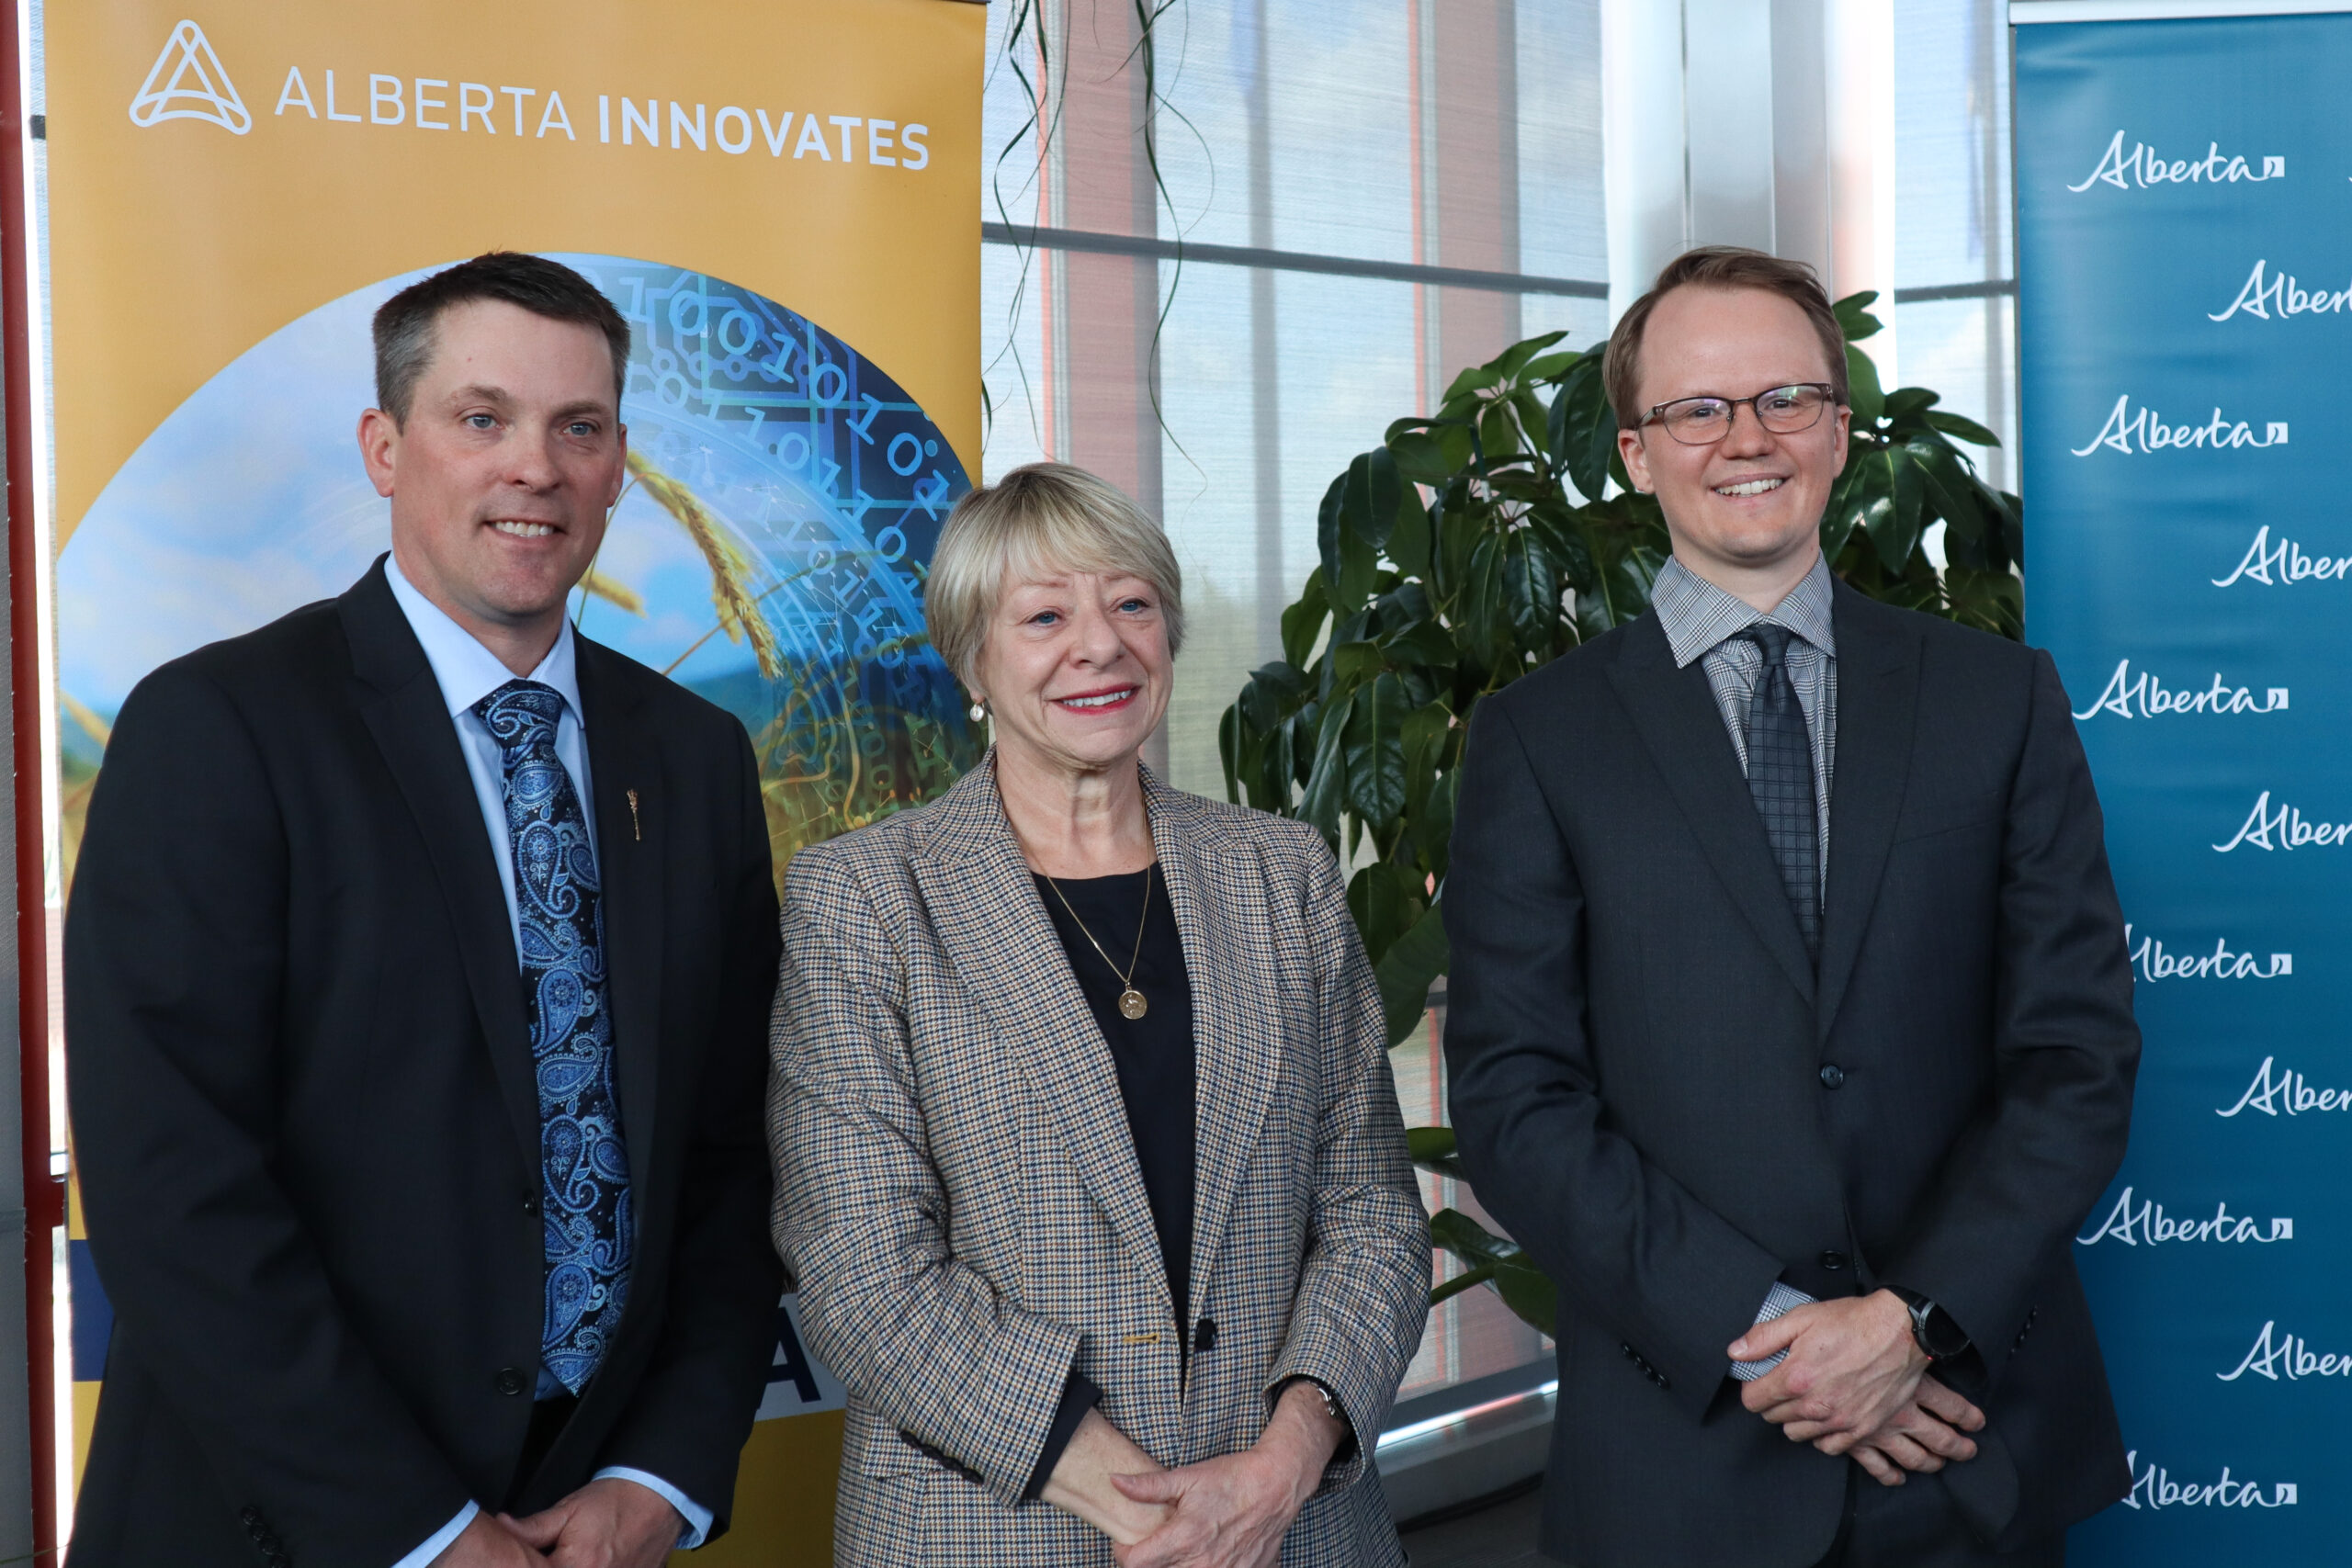 Alberta Innovates funds Wyvern through the Smart Agriculture and Food Digitalization and Automation Challenge (SAFDAC)